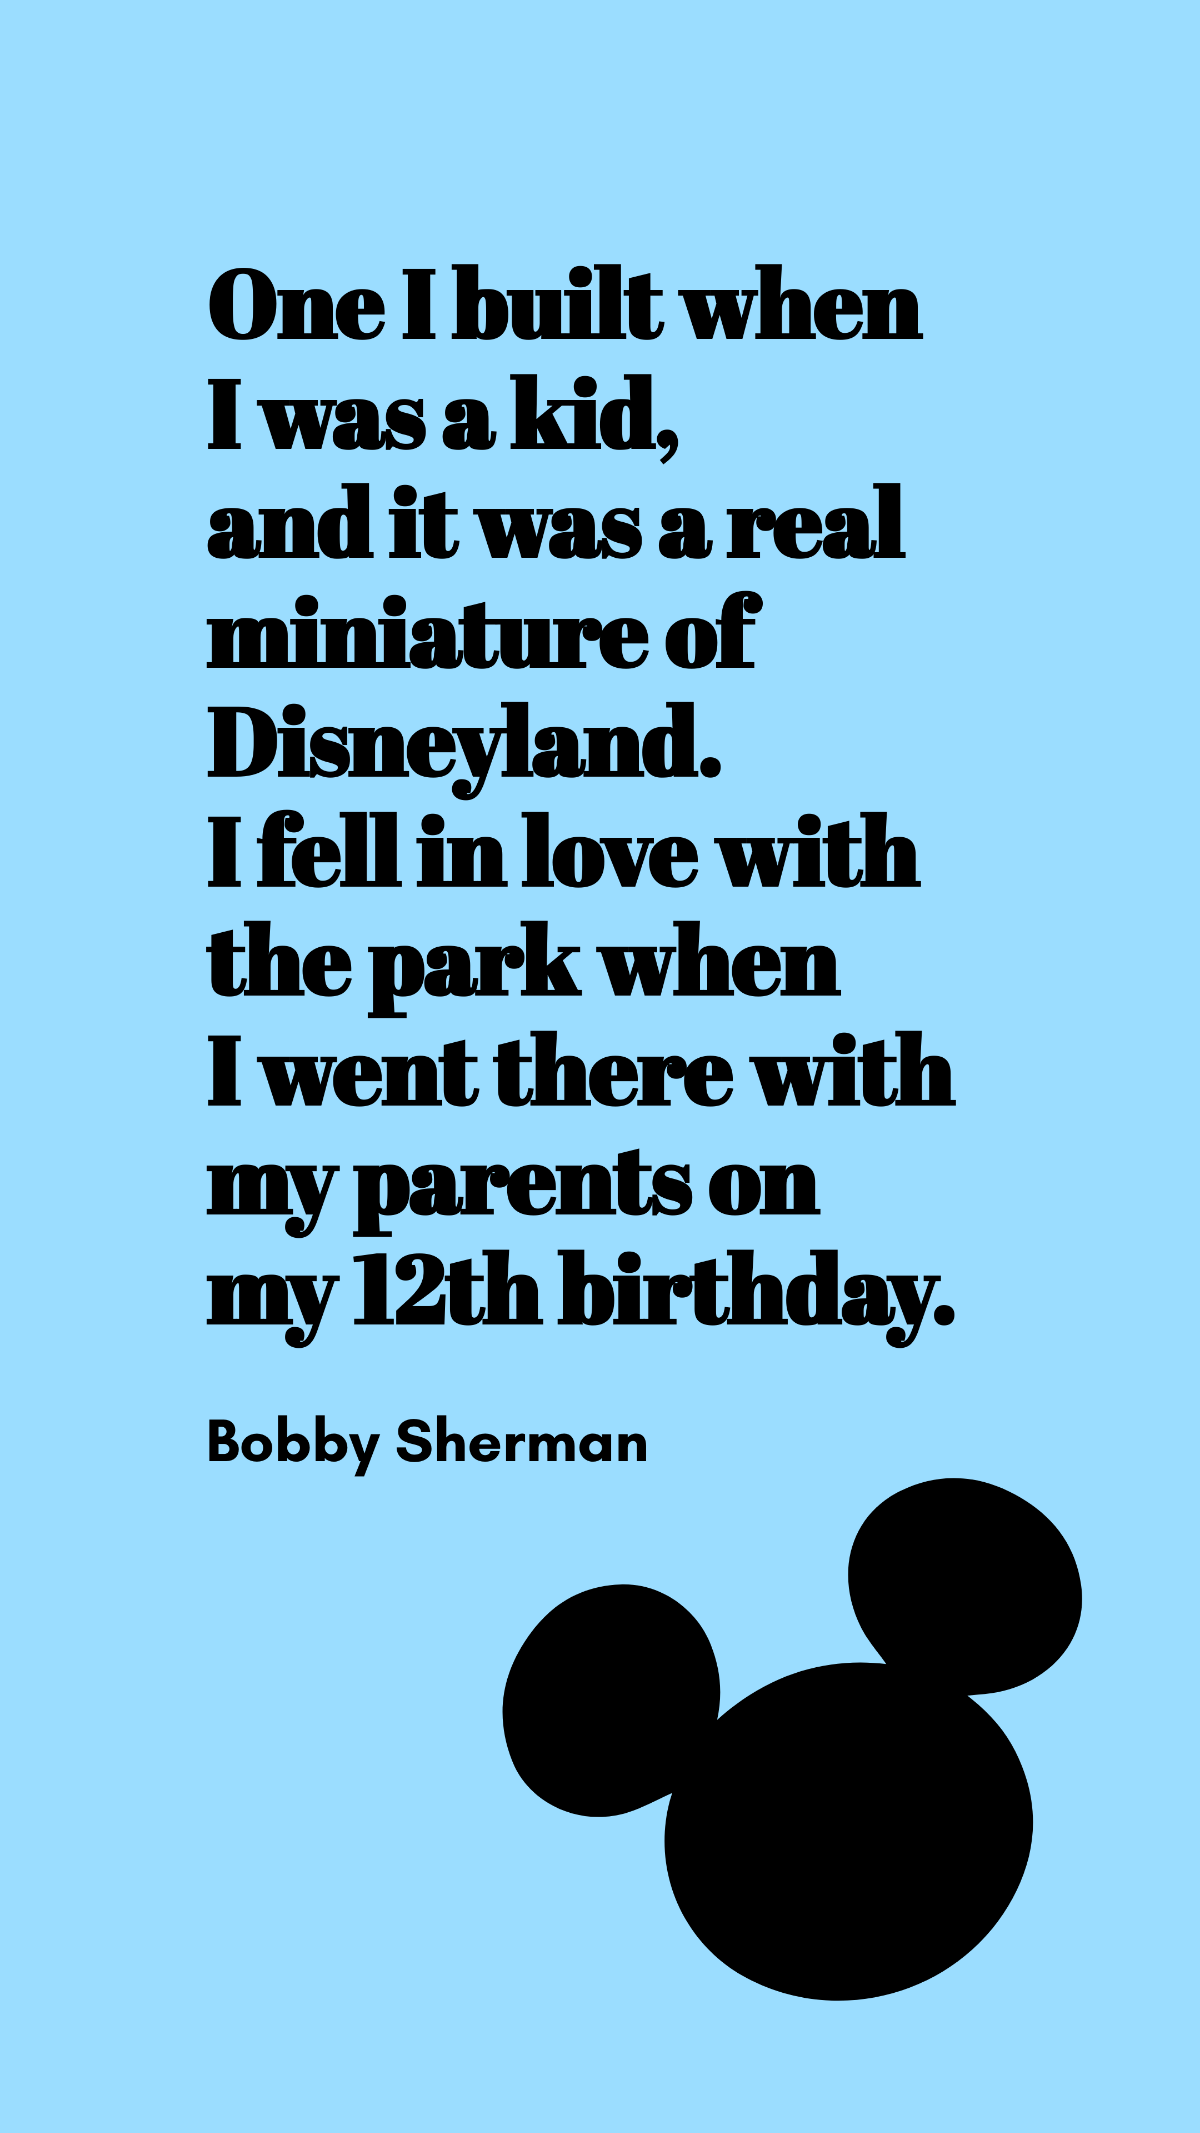 Bobby Sherman - One I built when I was a kid, and it was a real miniature of Disneyland. I fell in love with the park when I went there with my parents on my 12th birthday.